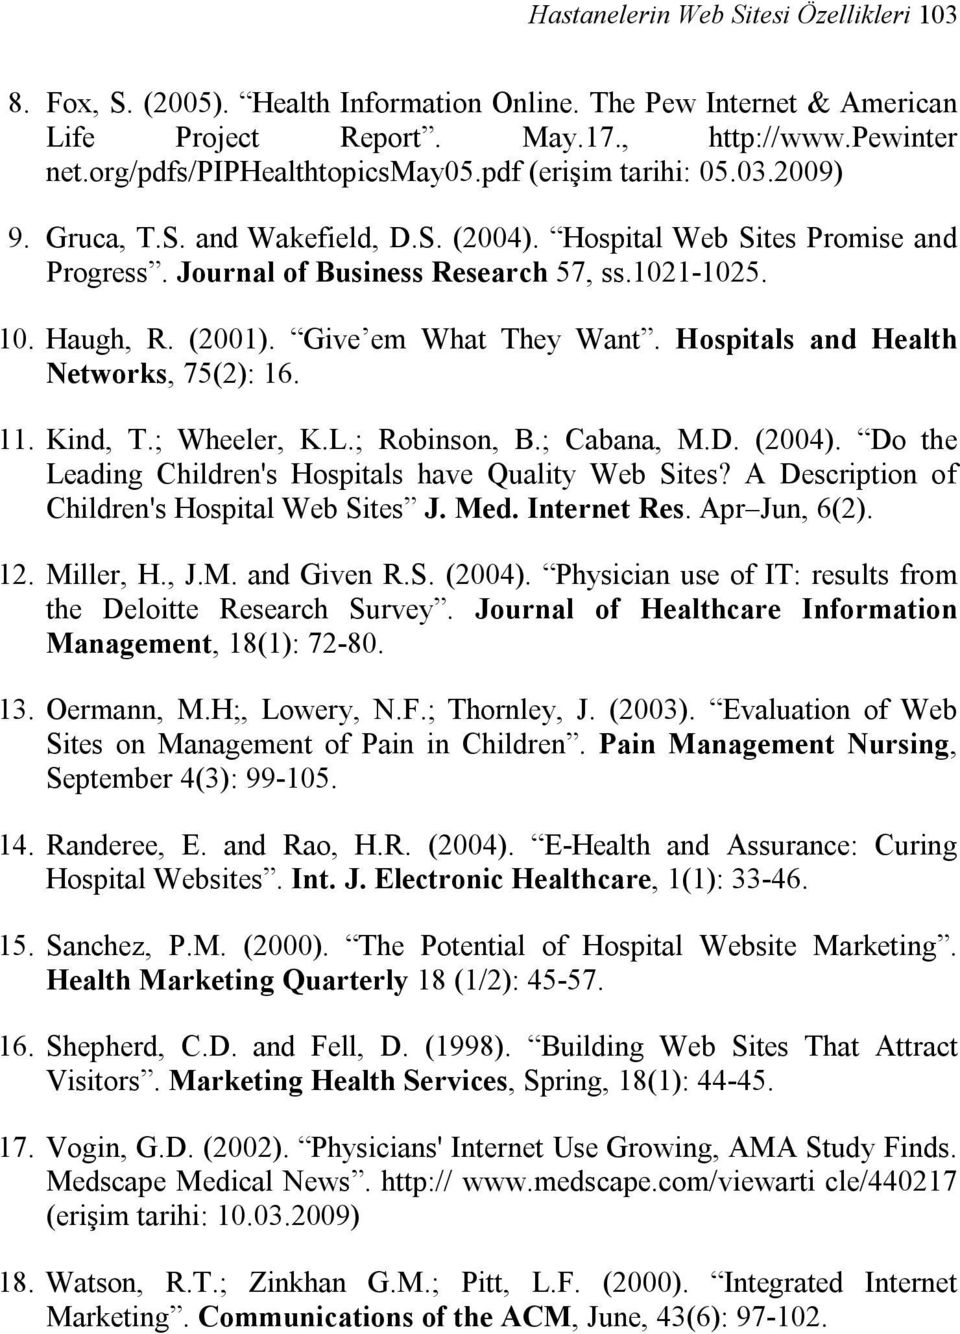 Give em What They Want. Hospitals and Health Networks, 75(2): 16. 11. Kind, T.; Wheeler, K.L.; Robinson, B.; Cabana, M.D. (2004). Do the Leading Children's Hospitals have Quality Web Sites?